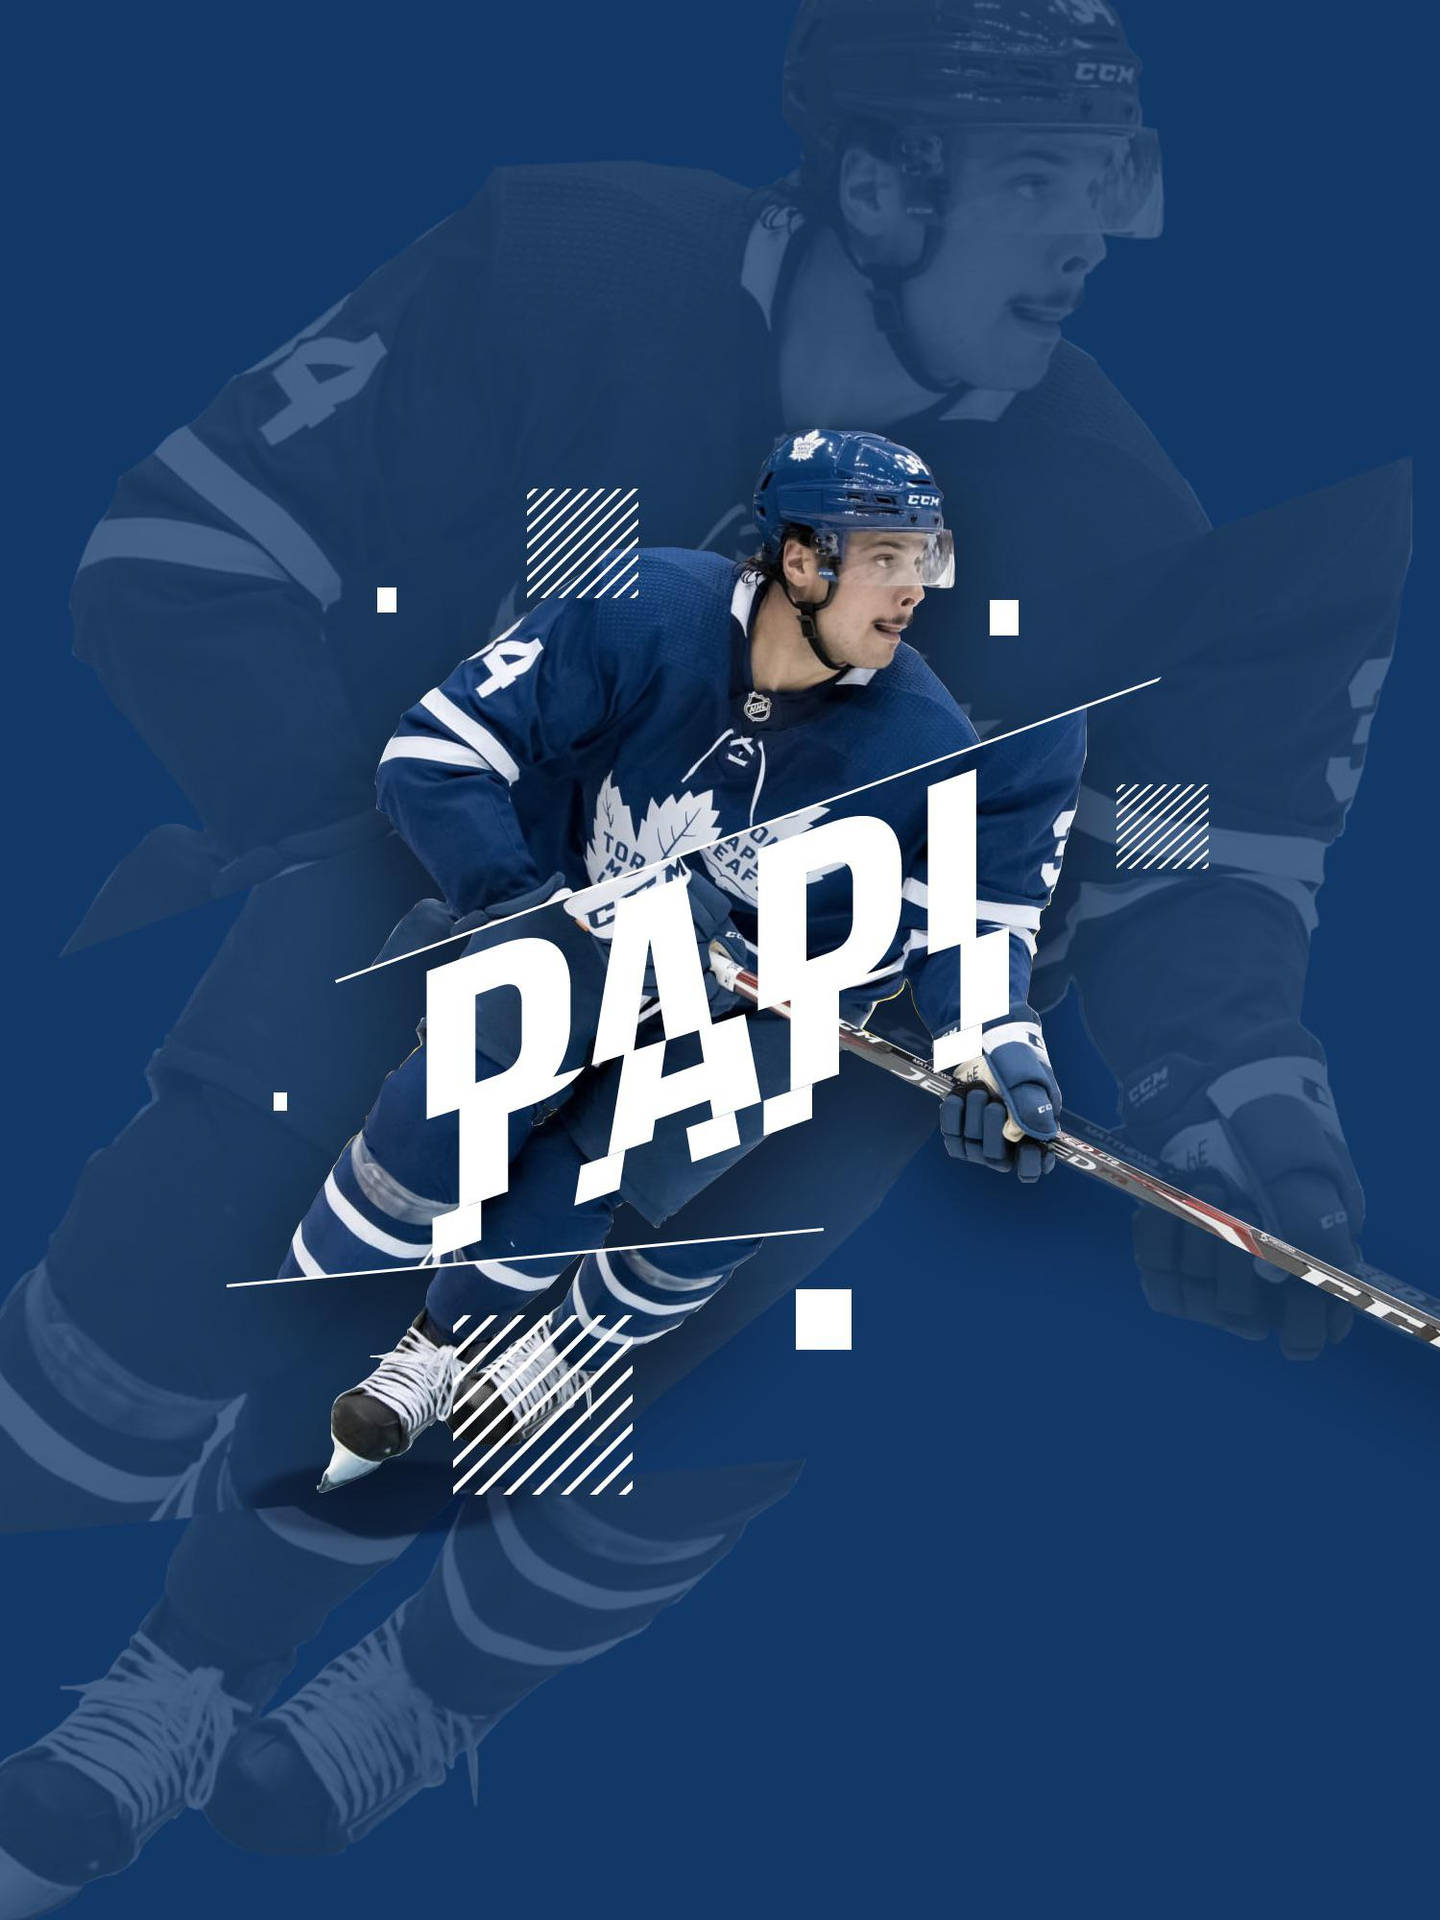 Auston Matthews, also known as 'Papi,' striking a pose during a game session Wallpaper